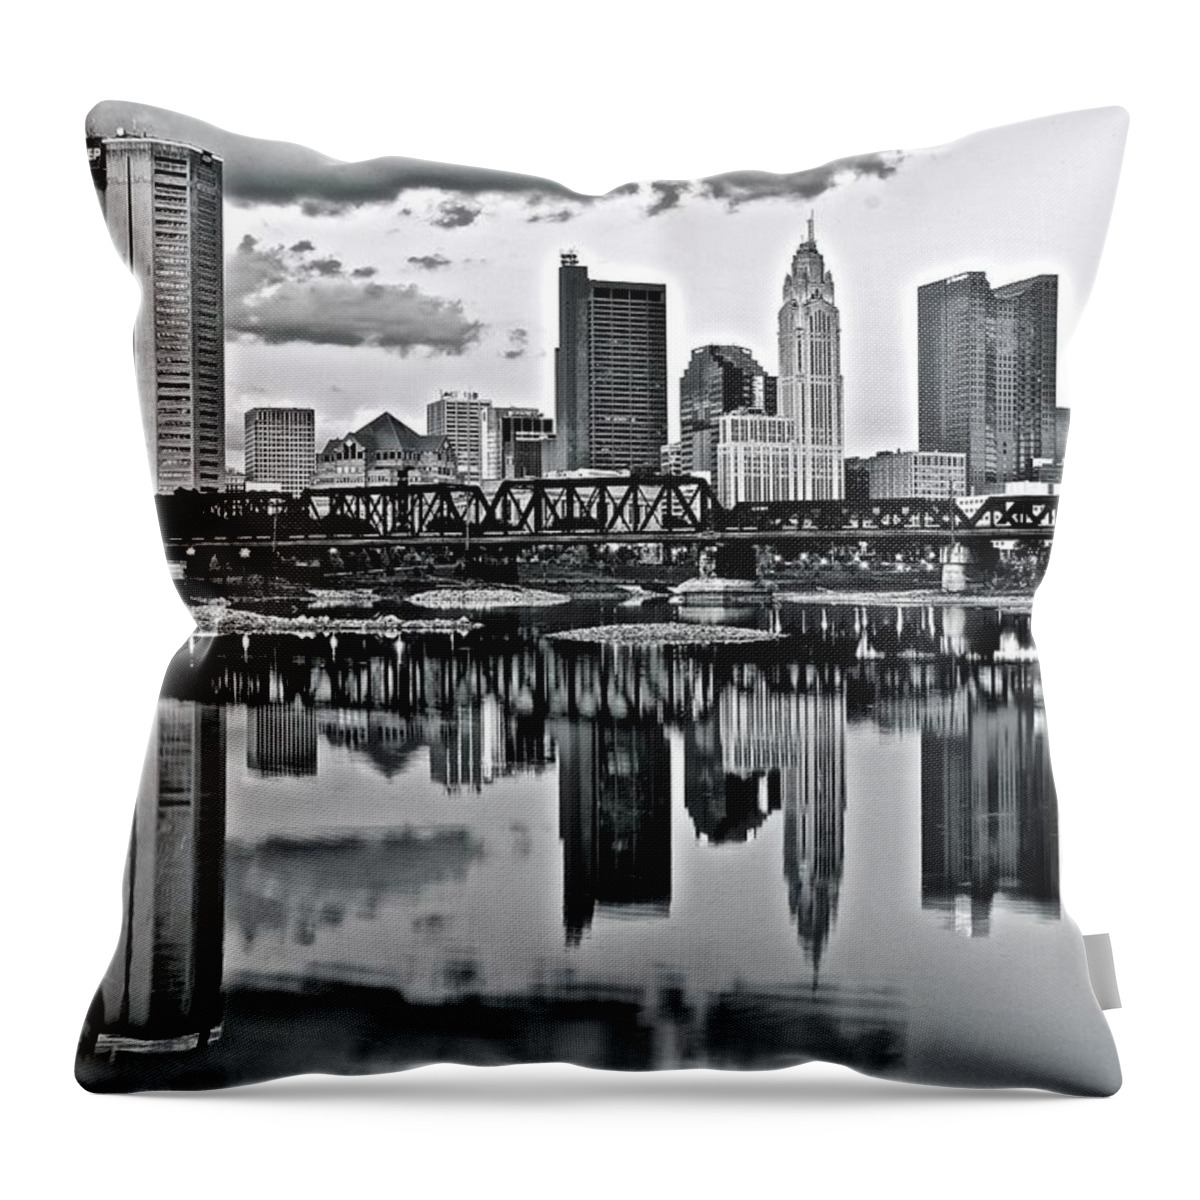 Columbus Throw Pillow featuring the photograph Charcoal Columbus Mirror Image by Frozen in Time Fine Art Photography